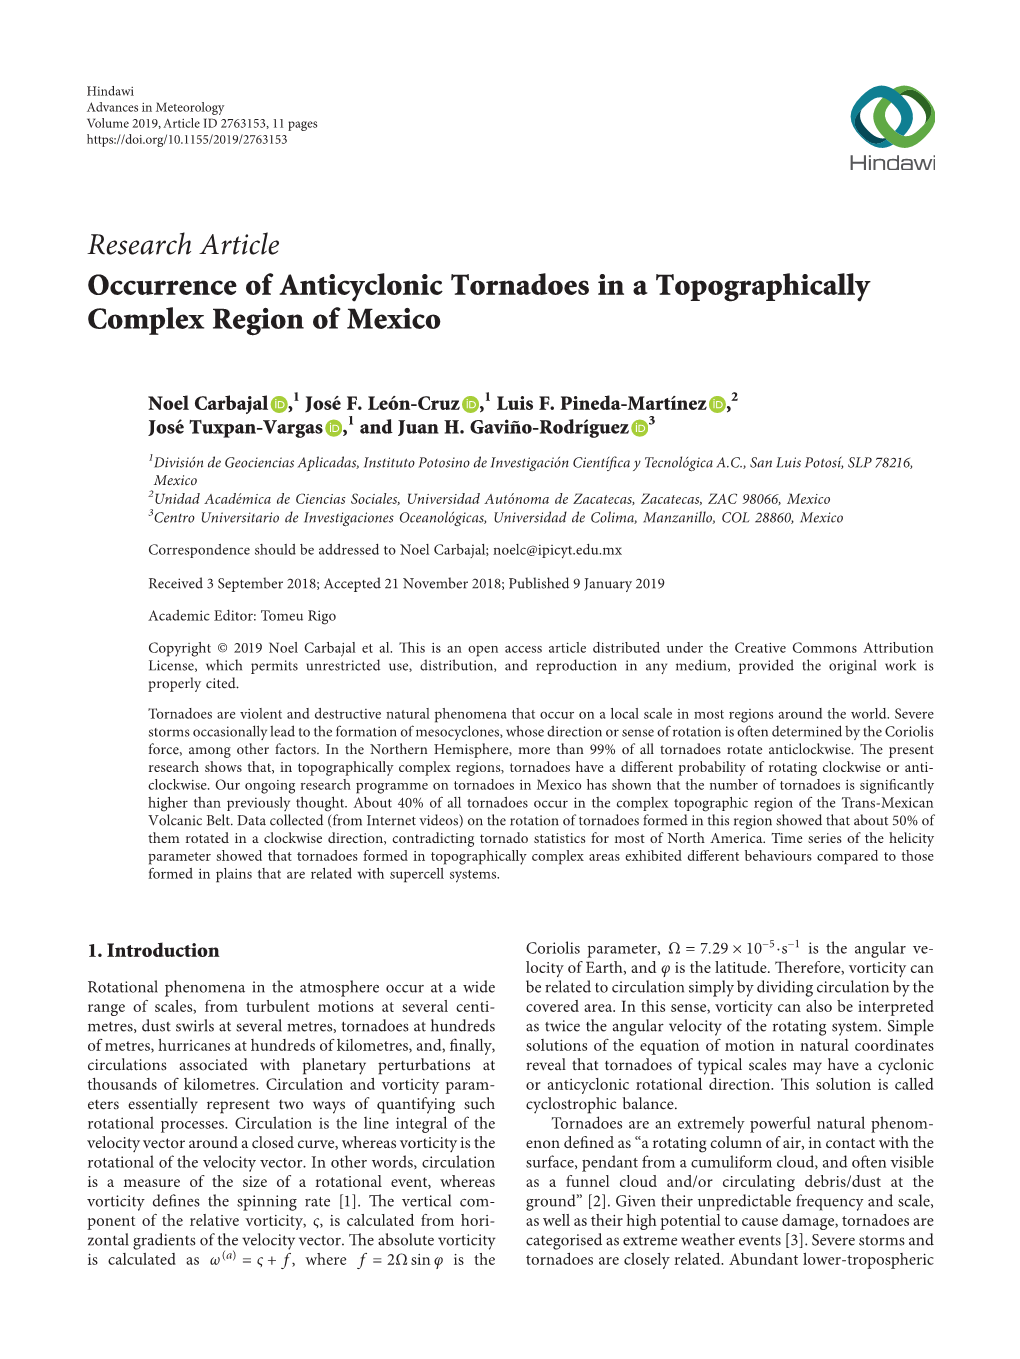 Occurrence of Anticyclonic Tornadoes in a Topographically Complex Region of Mexico